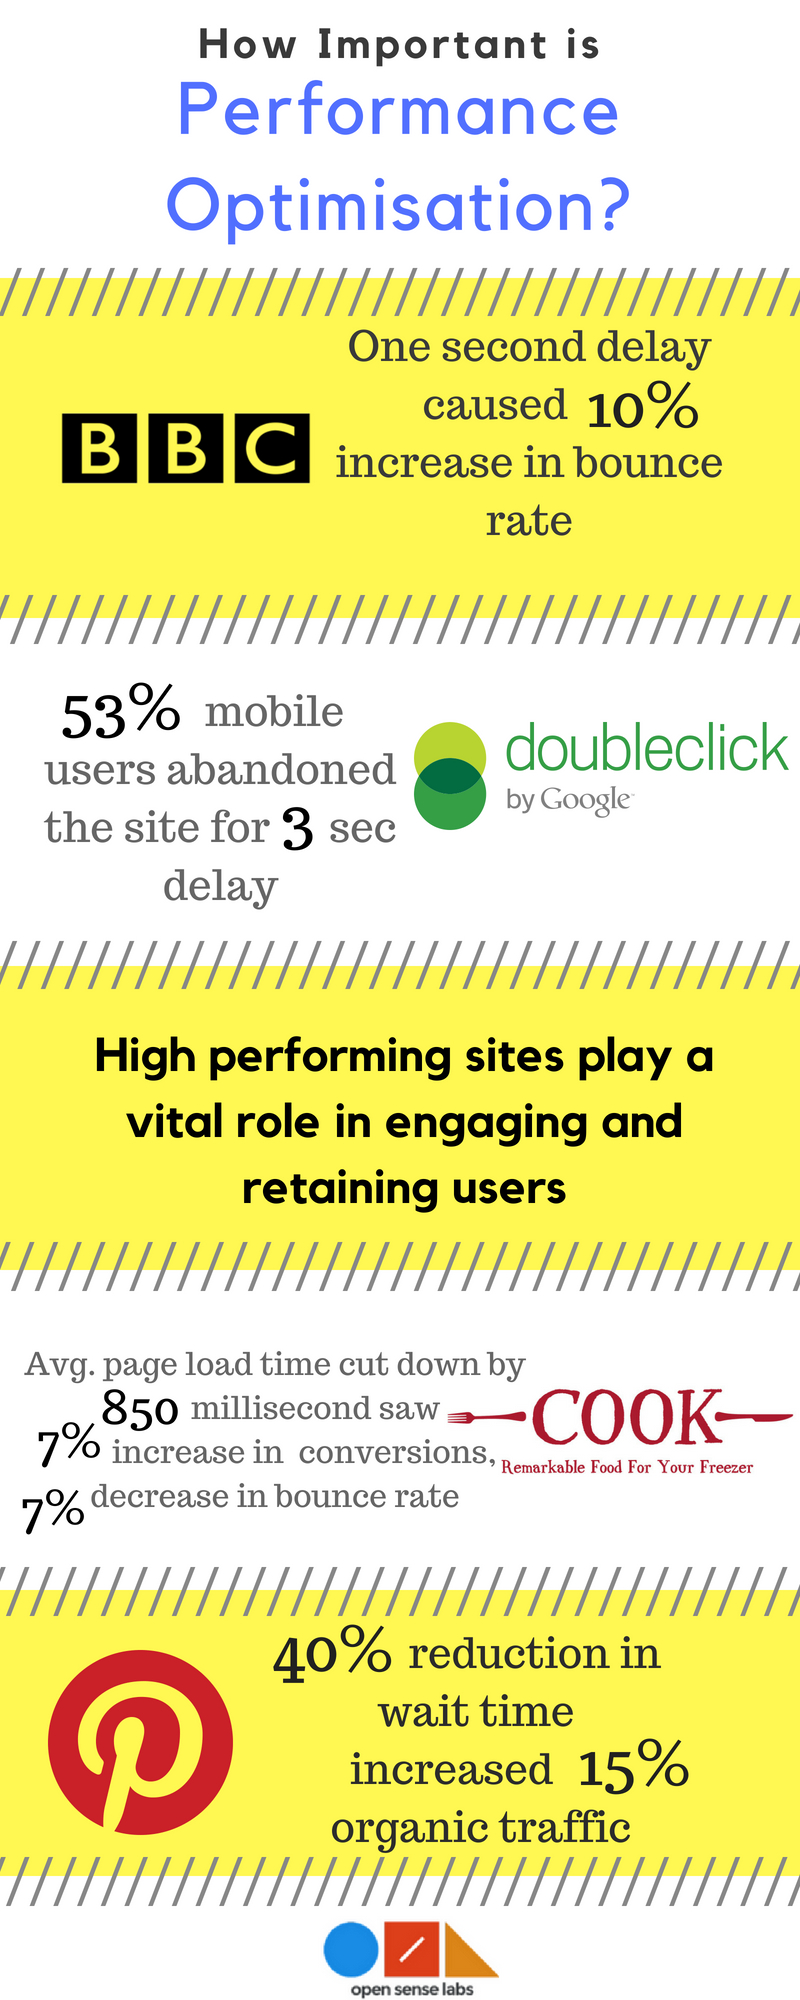 Infographic showing statistics on the importance of performance optimisation for improving user retention